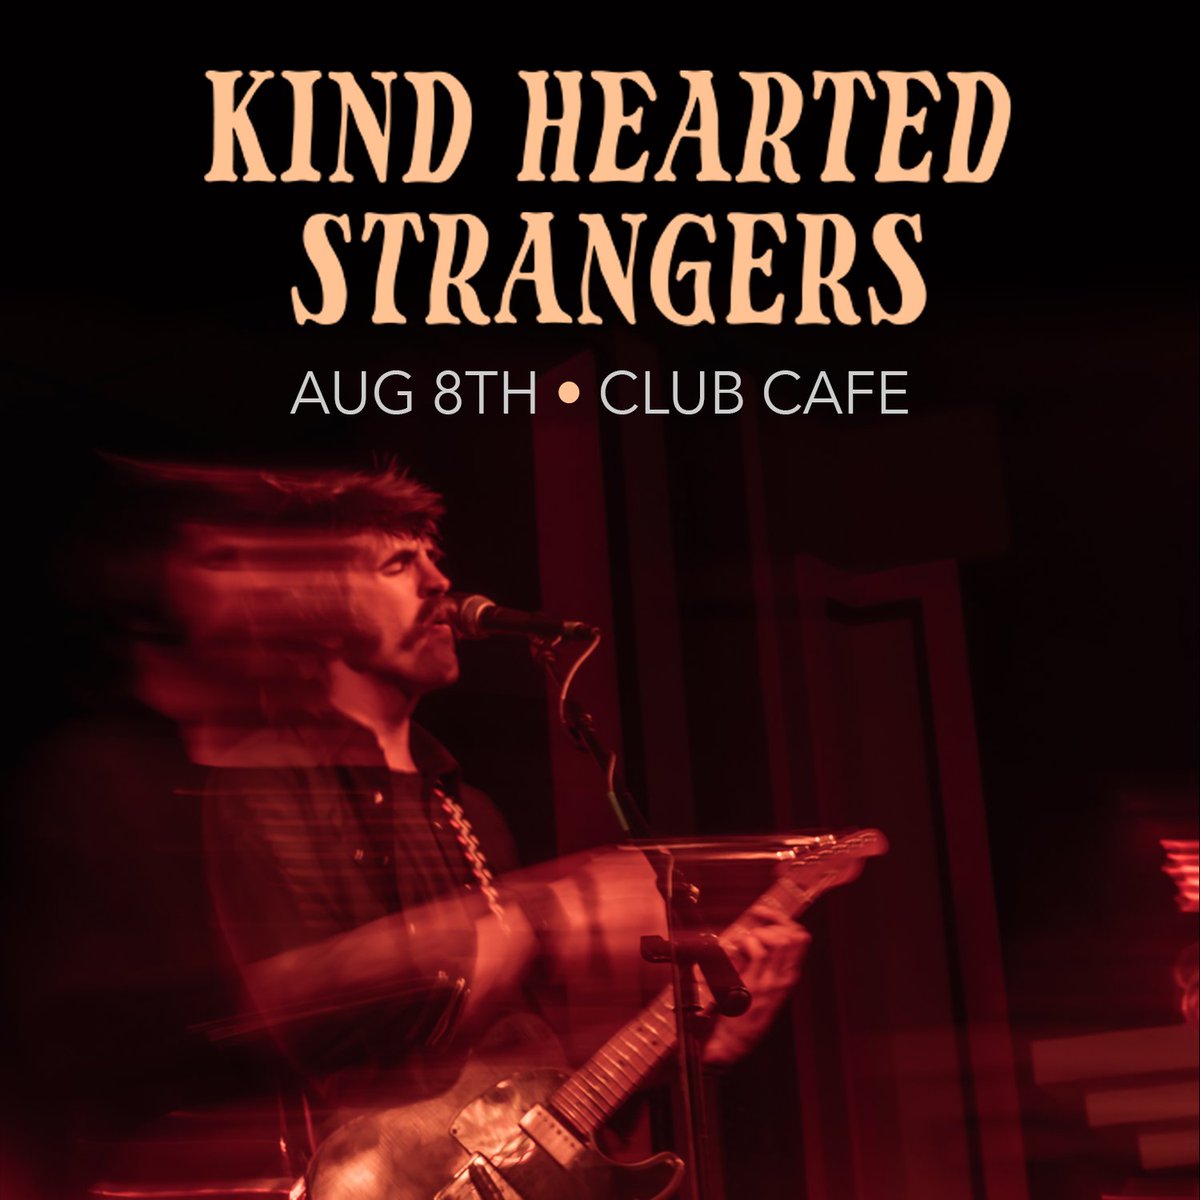 📣🗓NEW SHOW 🗓📣

@ClubCafeLive | 08/08 | #KindHeartedStrangers!

🎟 On Sale 05/07 via: hive.co/l/0808kindhear…

#opusonepgh #pittsburgh #kindheartedstrangers #clubcafe #clubcafelive #national #indie